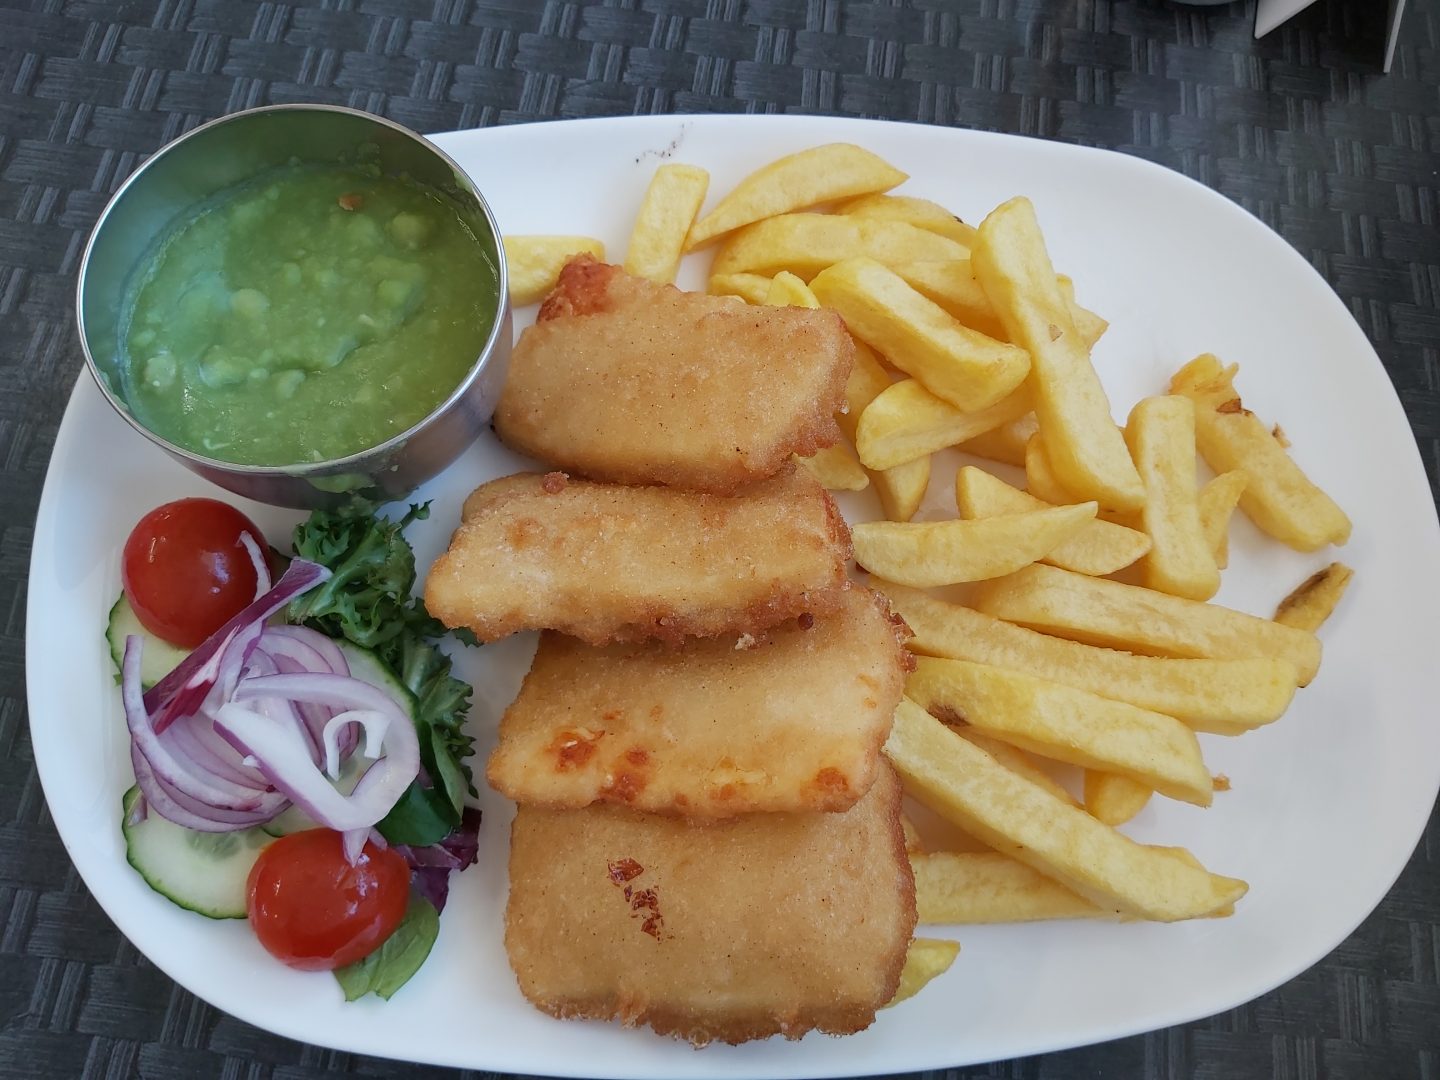 Beer battered halloumi with chips, salad and mushy peas at Sara's Tearoom dog friendly eatery in Great Yarmouth